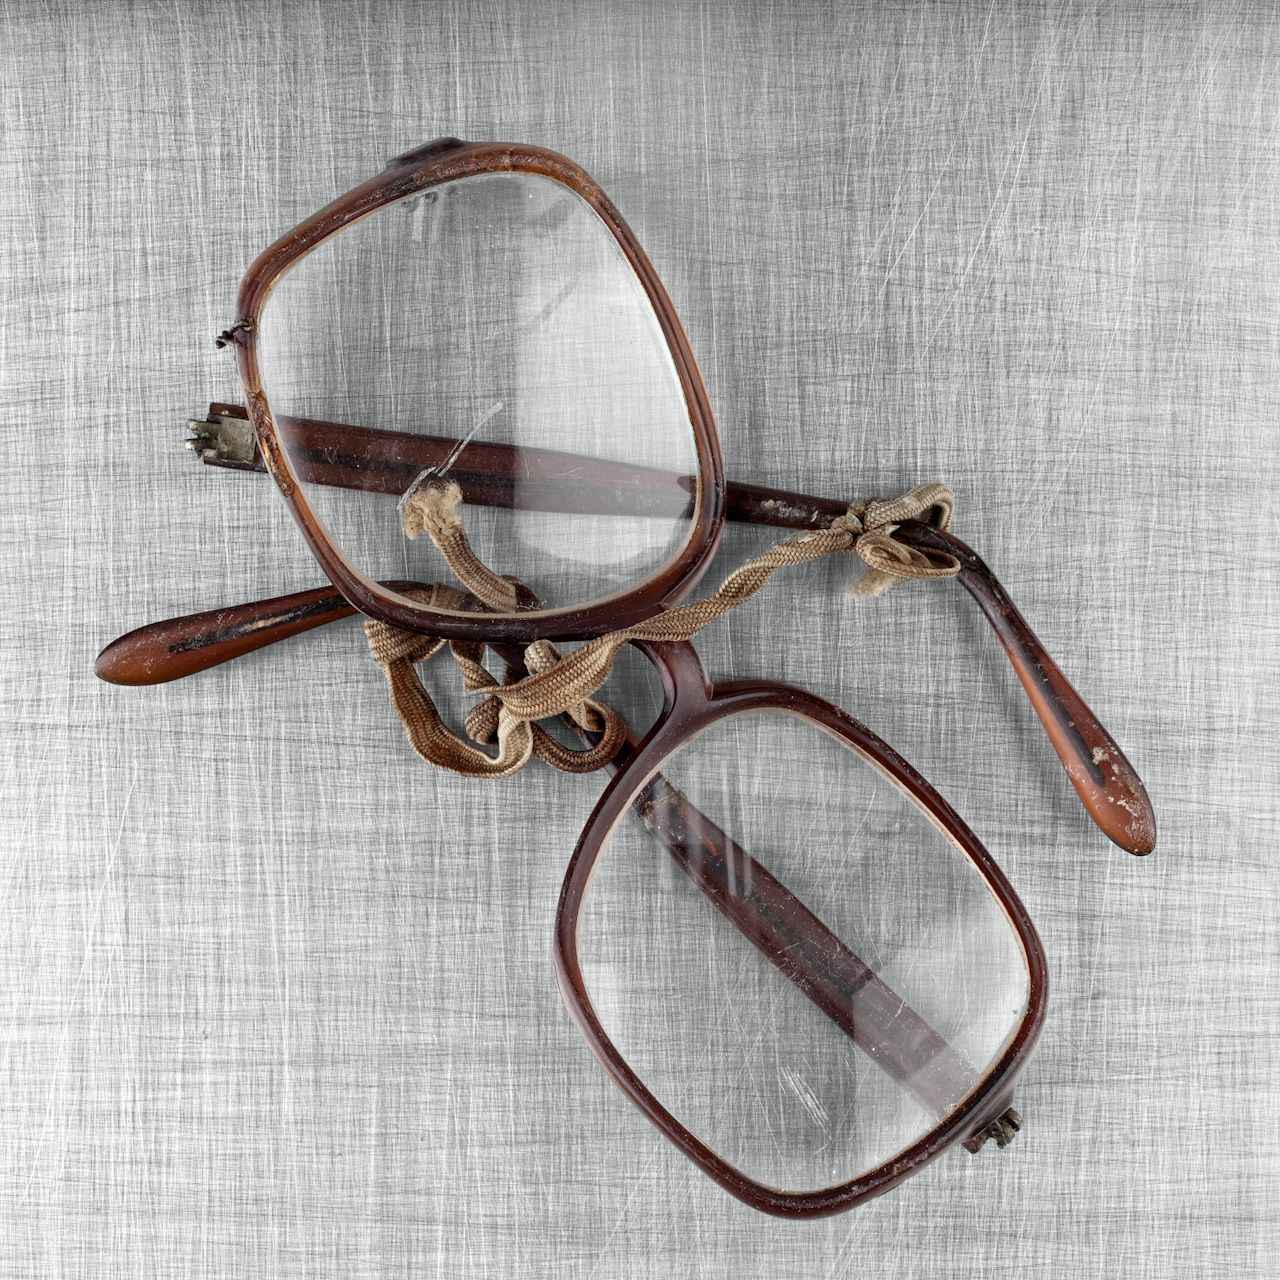 Glasses, from Quest for Identity. Photo: Ziyah Gafić